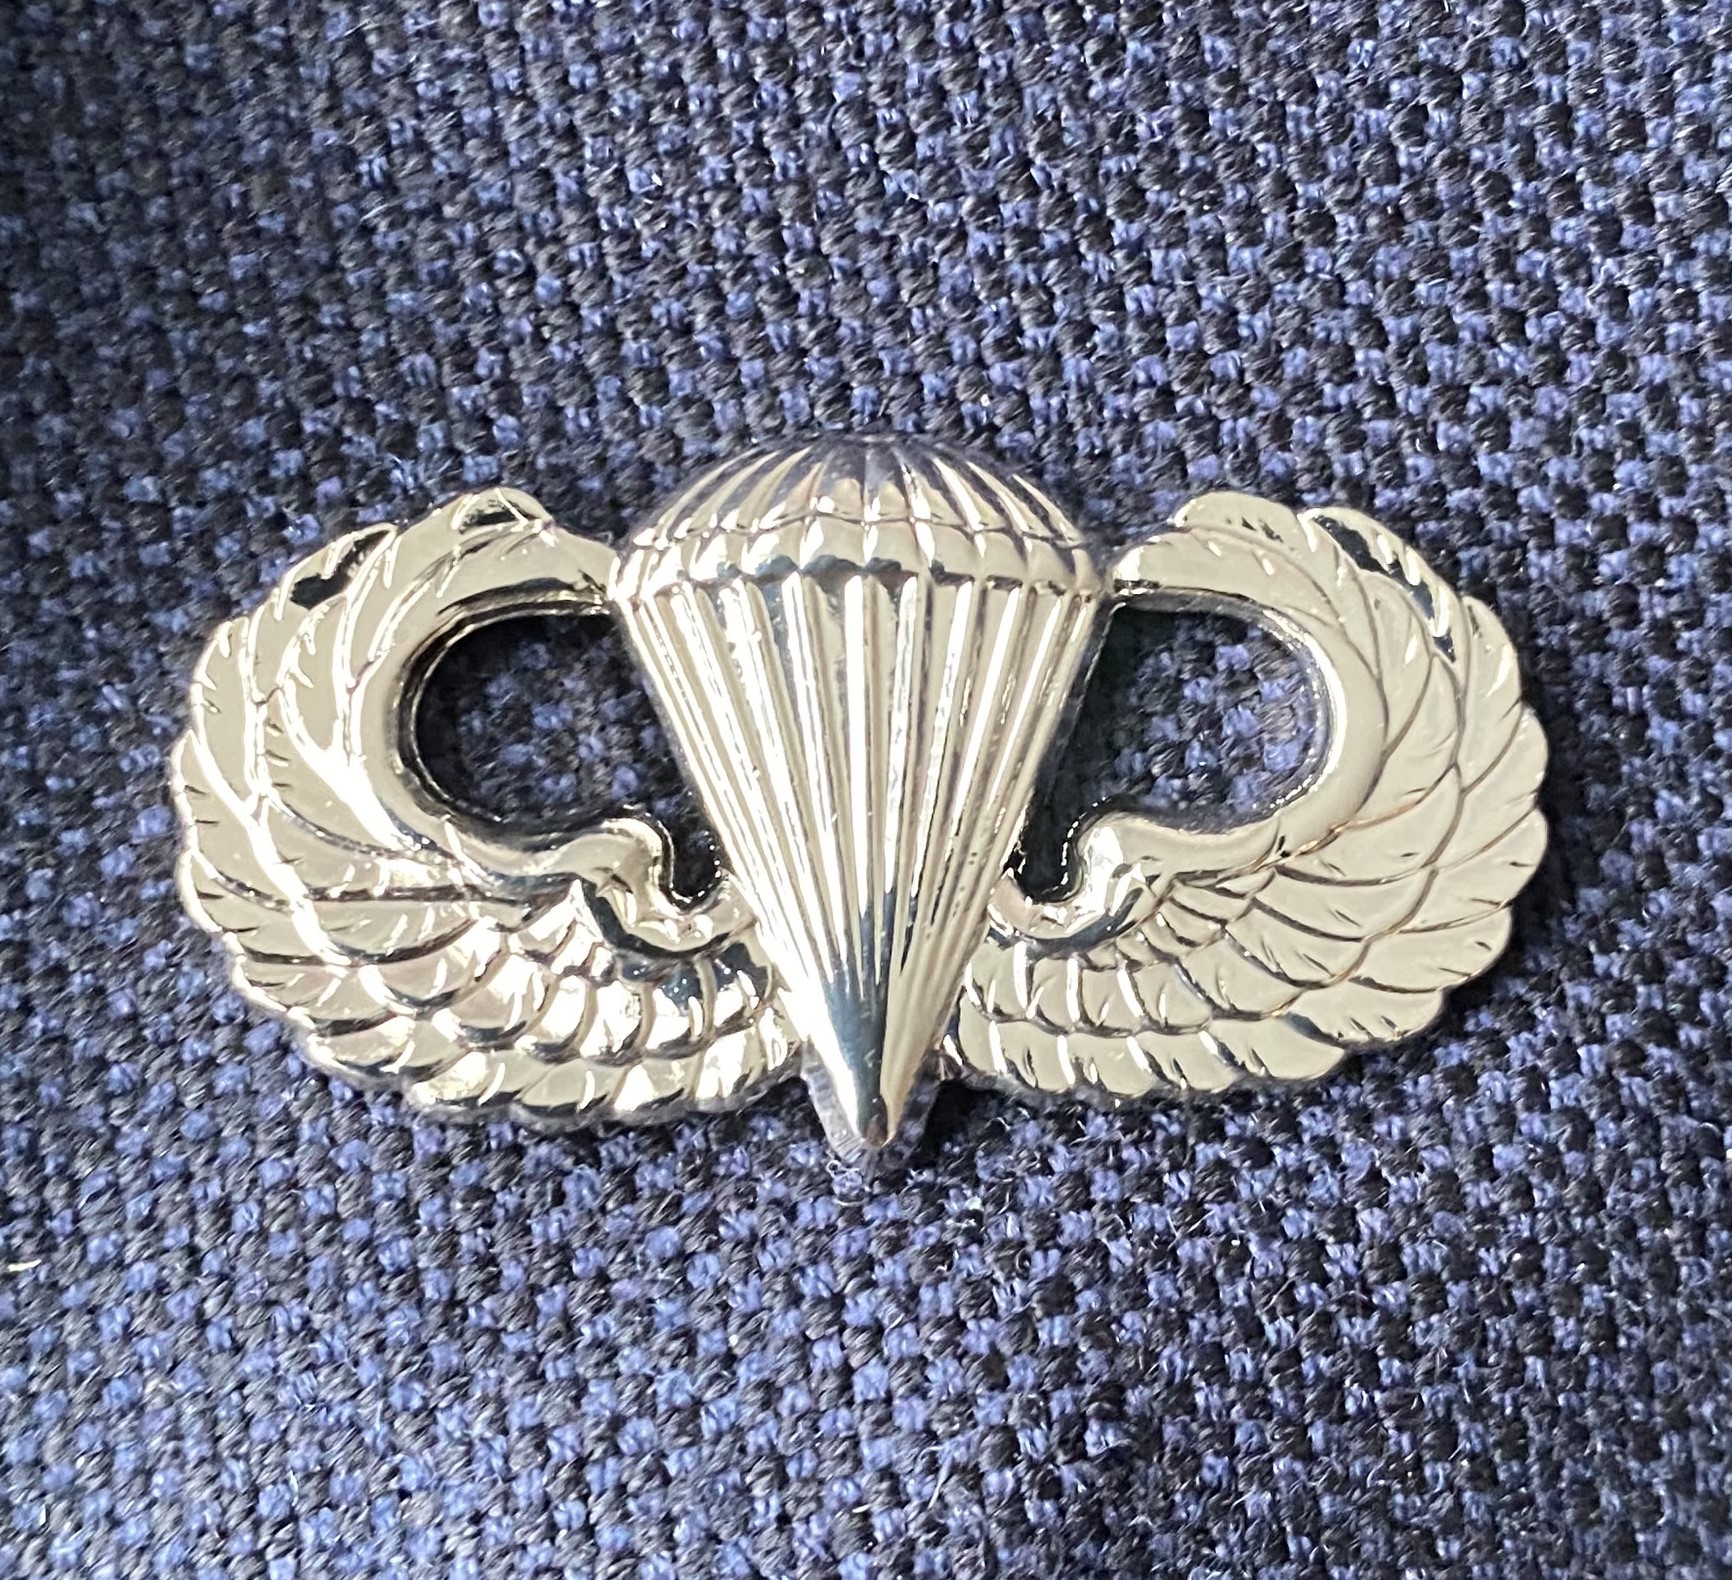 US ARMY JUMP WINGS - MIRROR FINISH - 4 Sizes